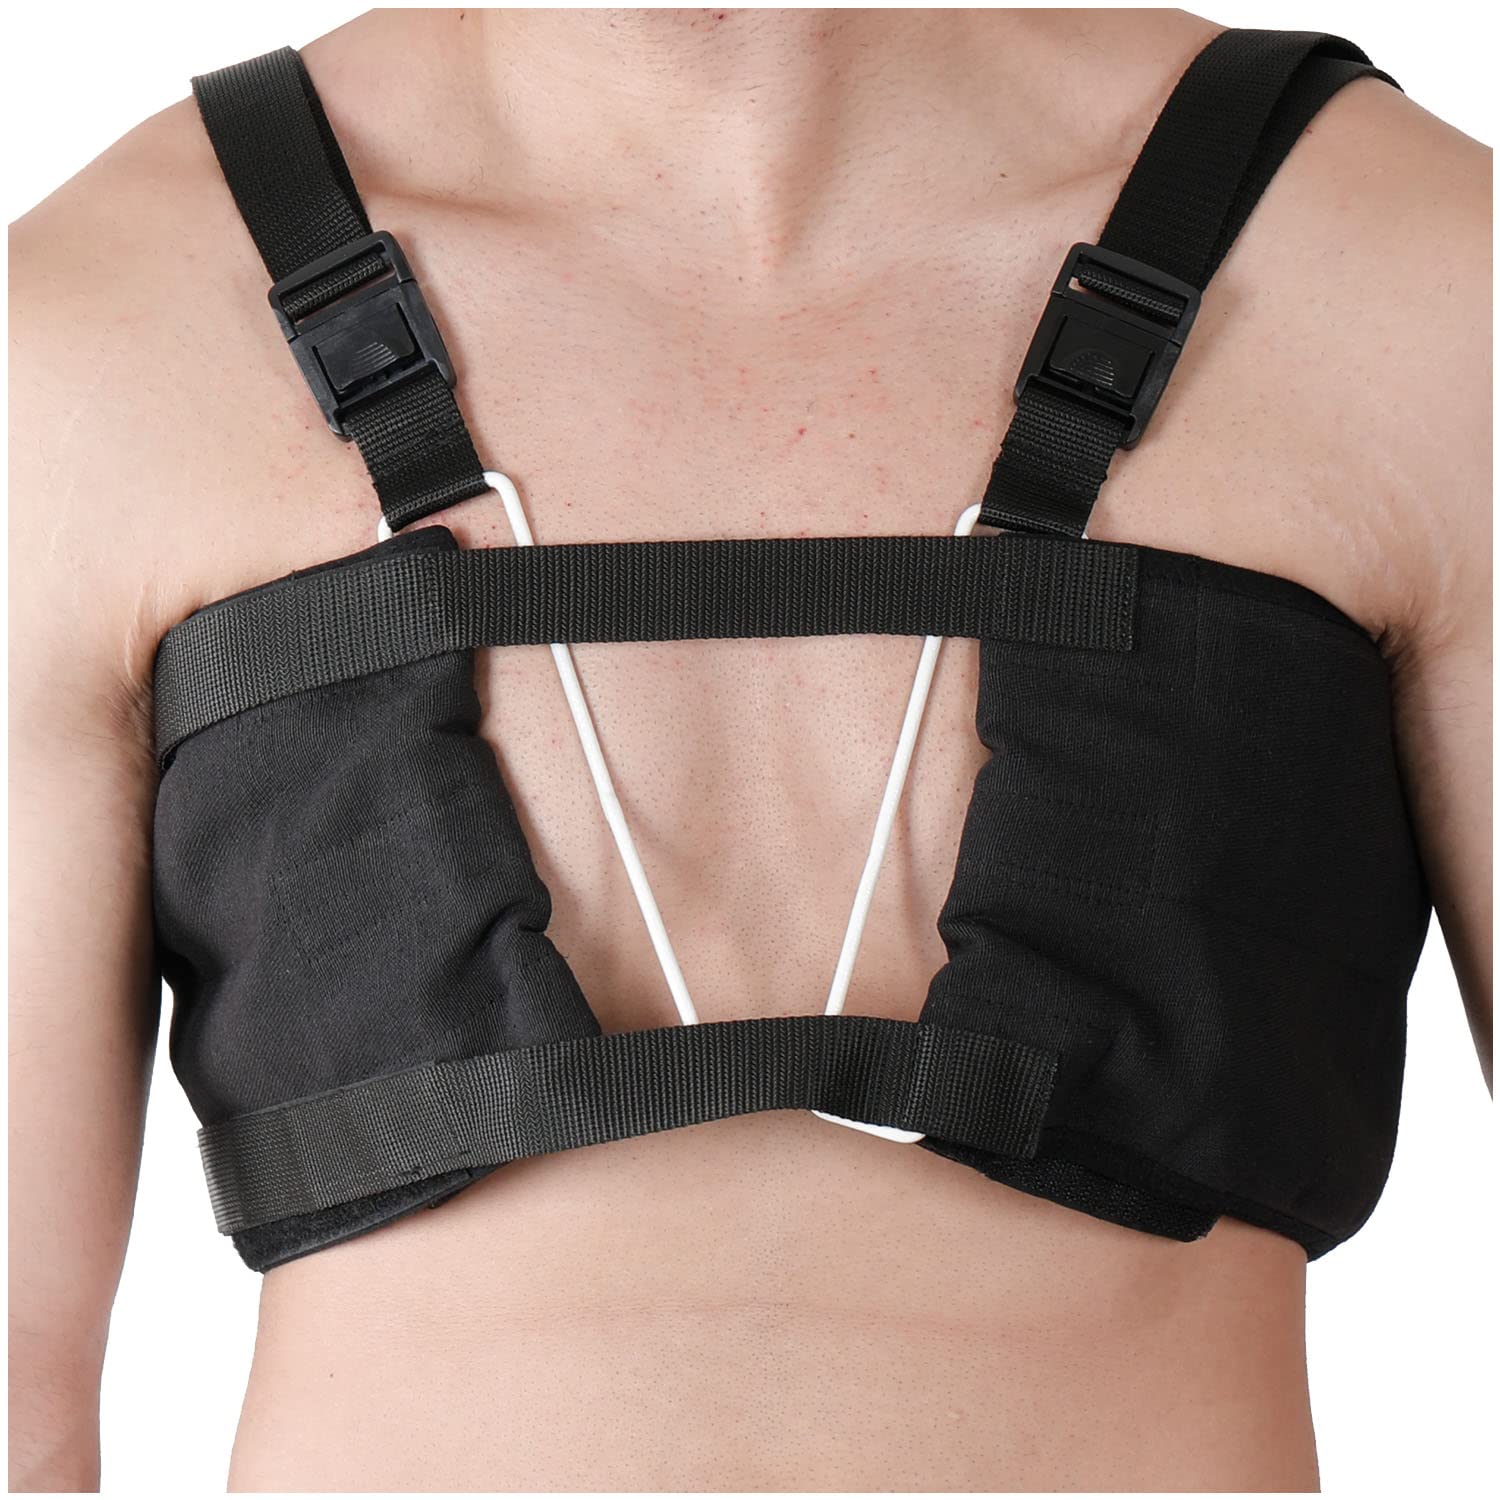 Armor Adult Unisex Chest Support Brace with 2 Wire Frame Grips to